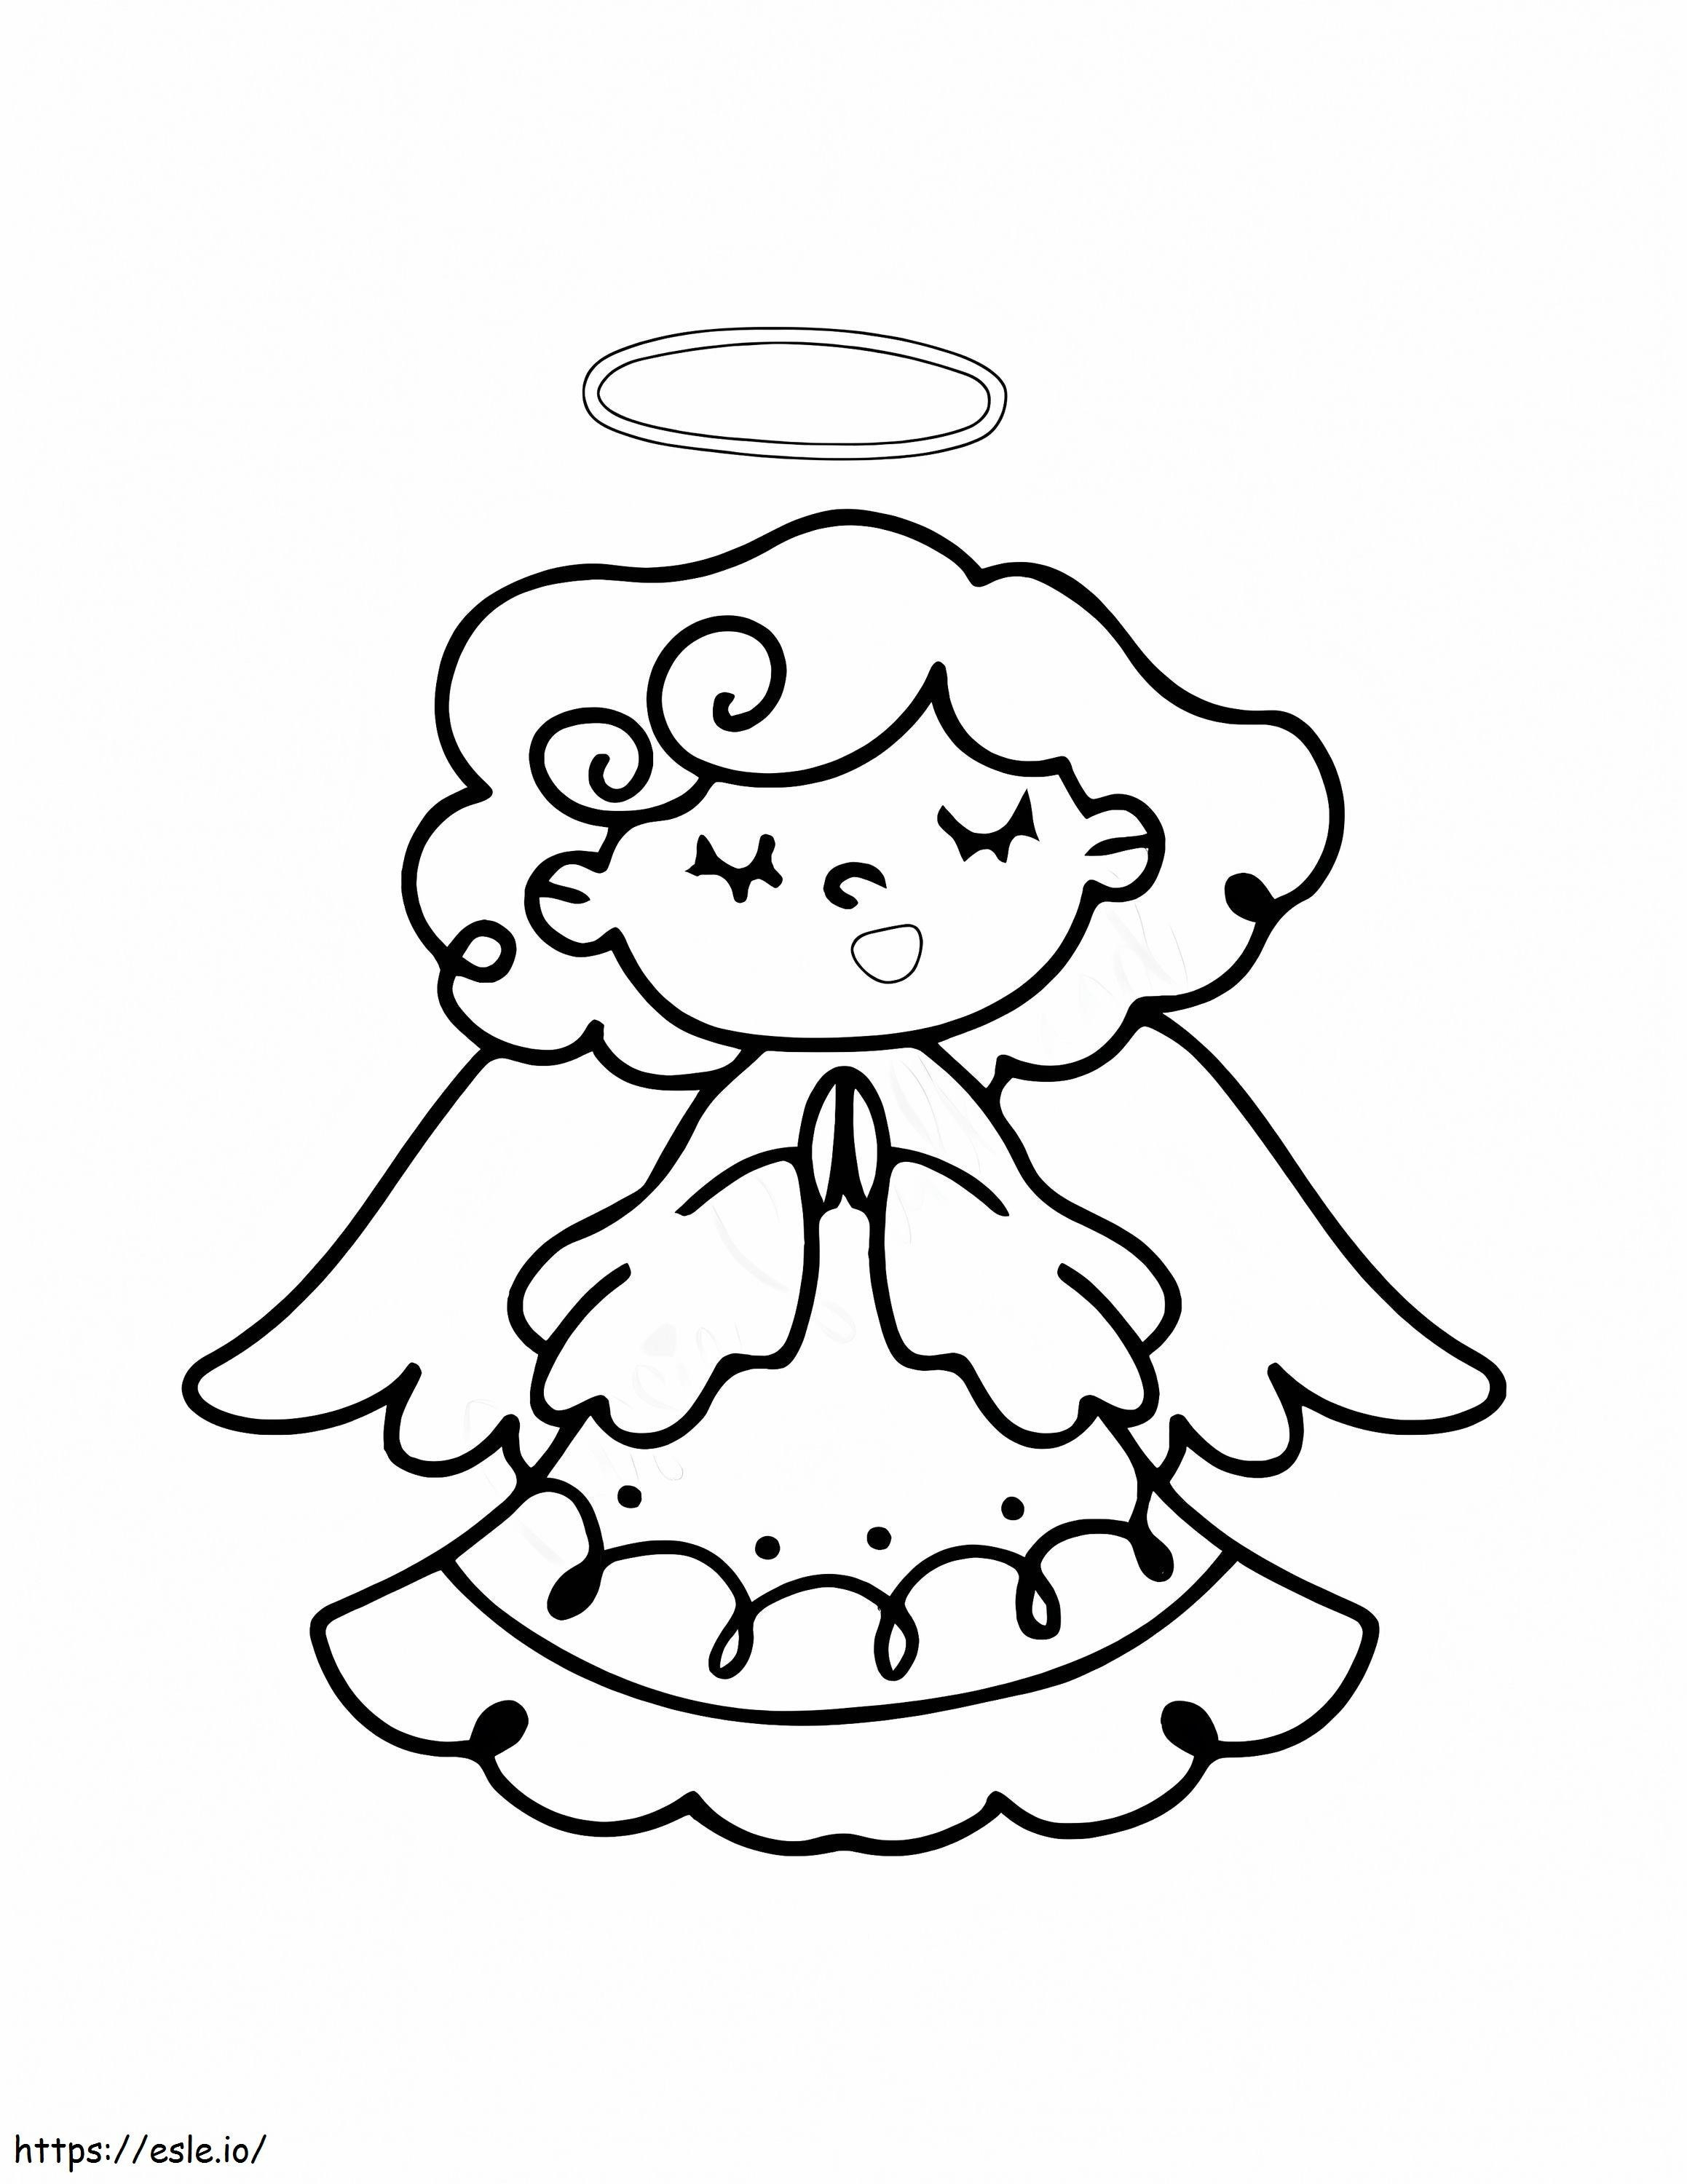 Angel Free Images coloring page